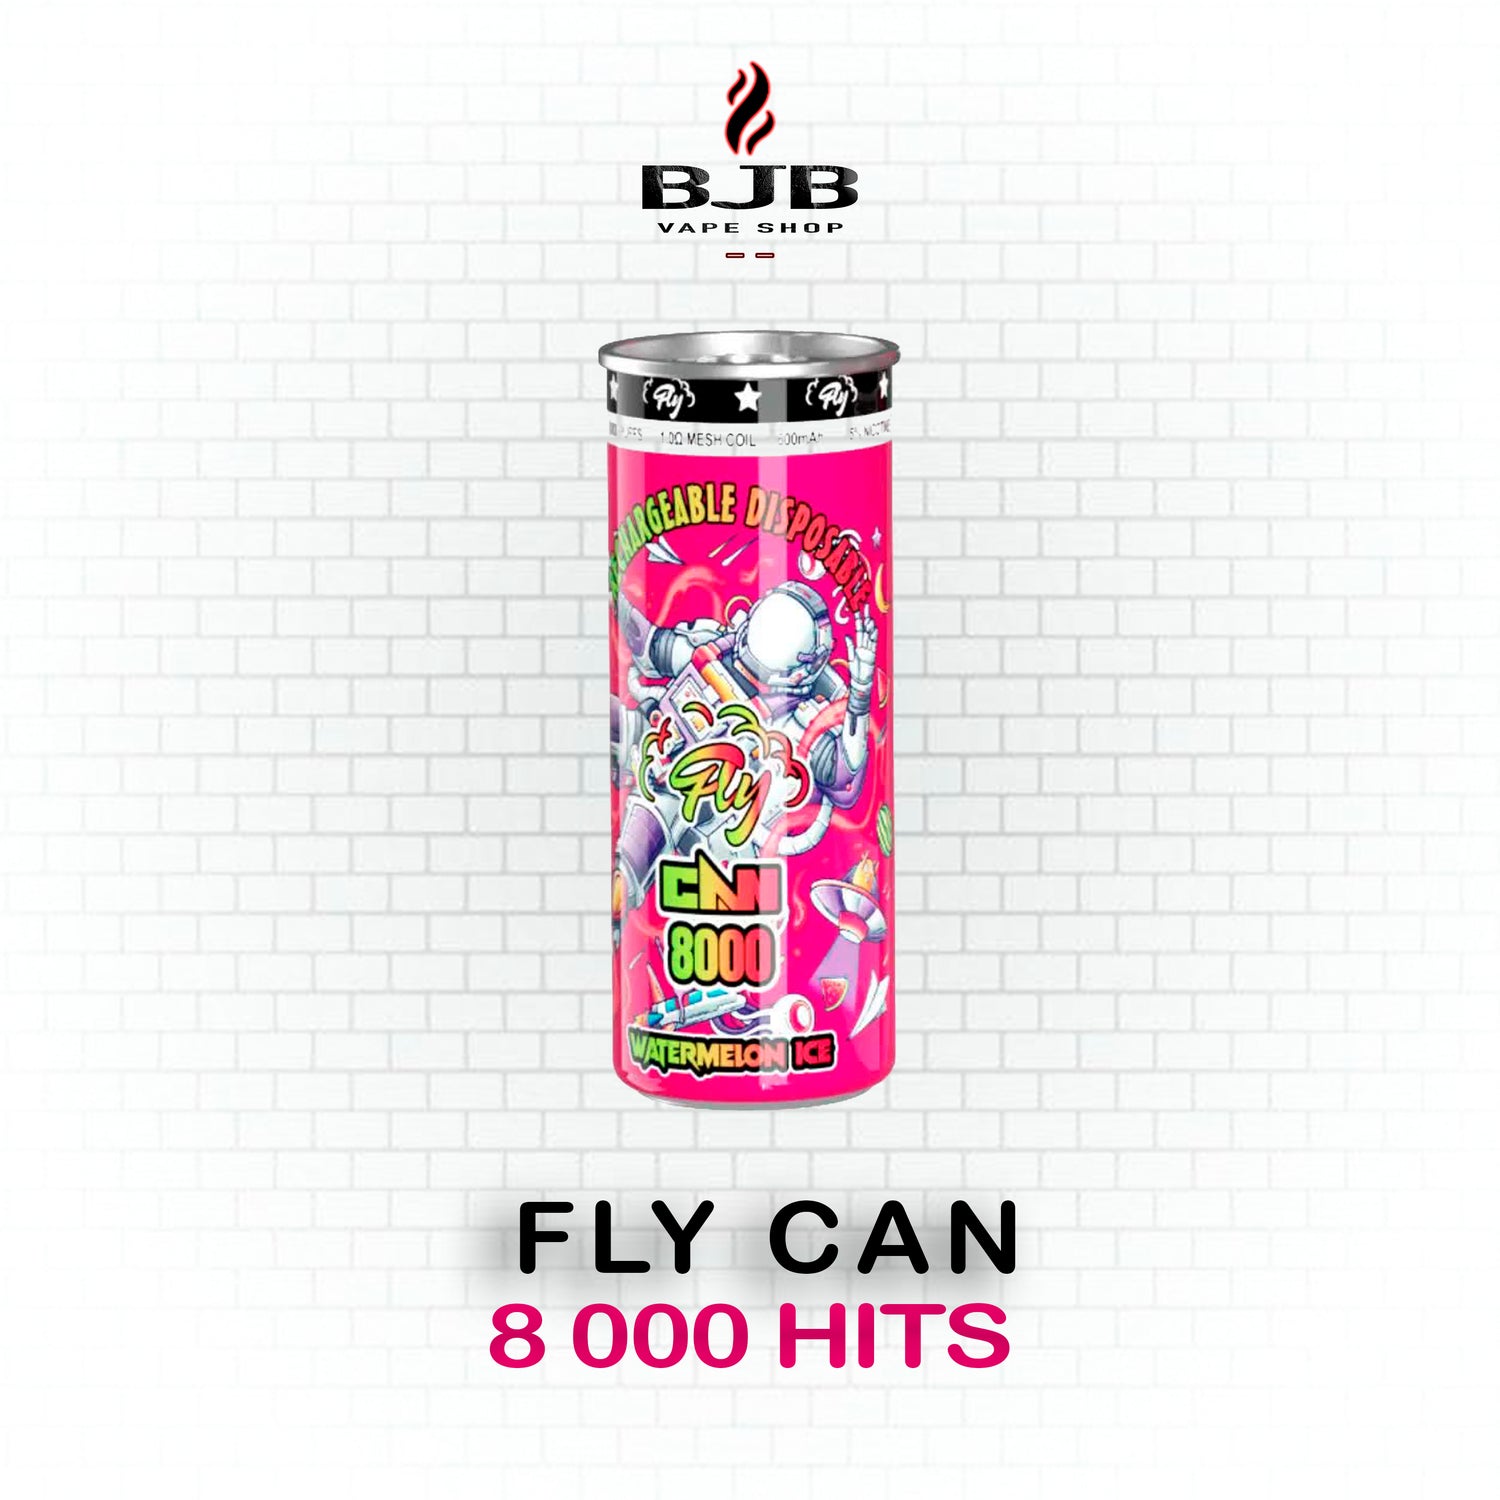 FLY CAN